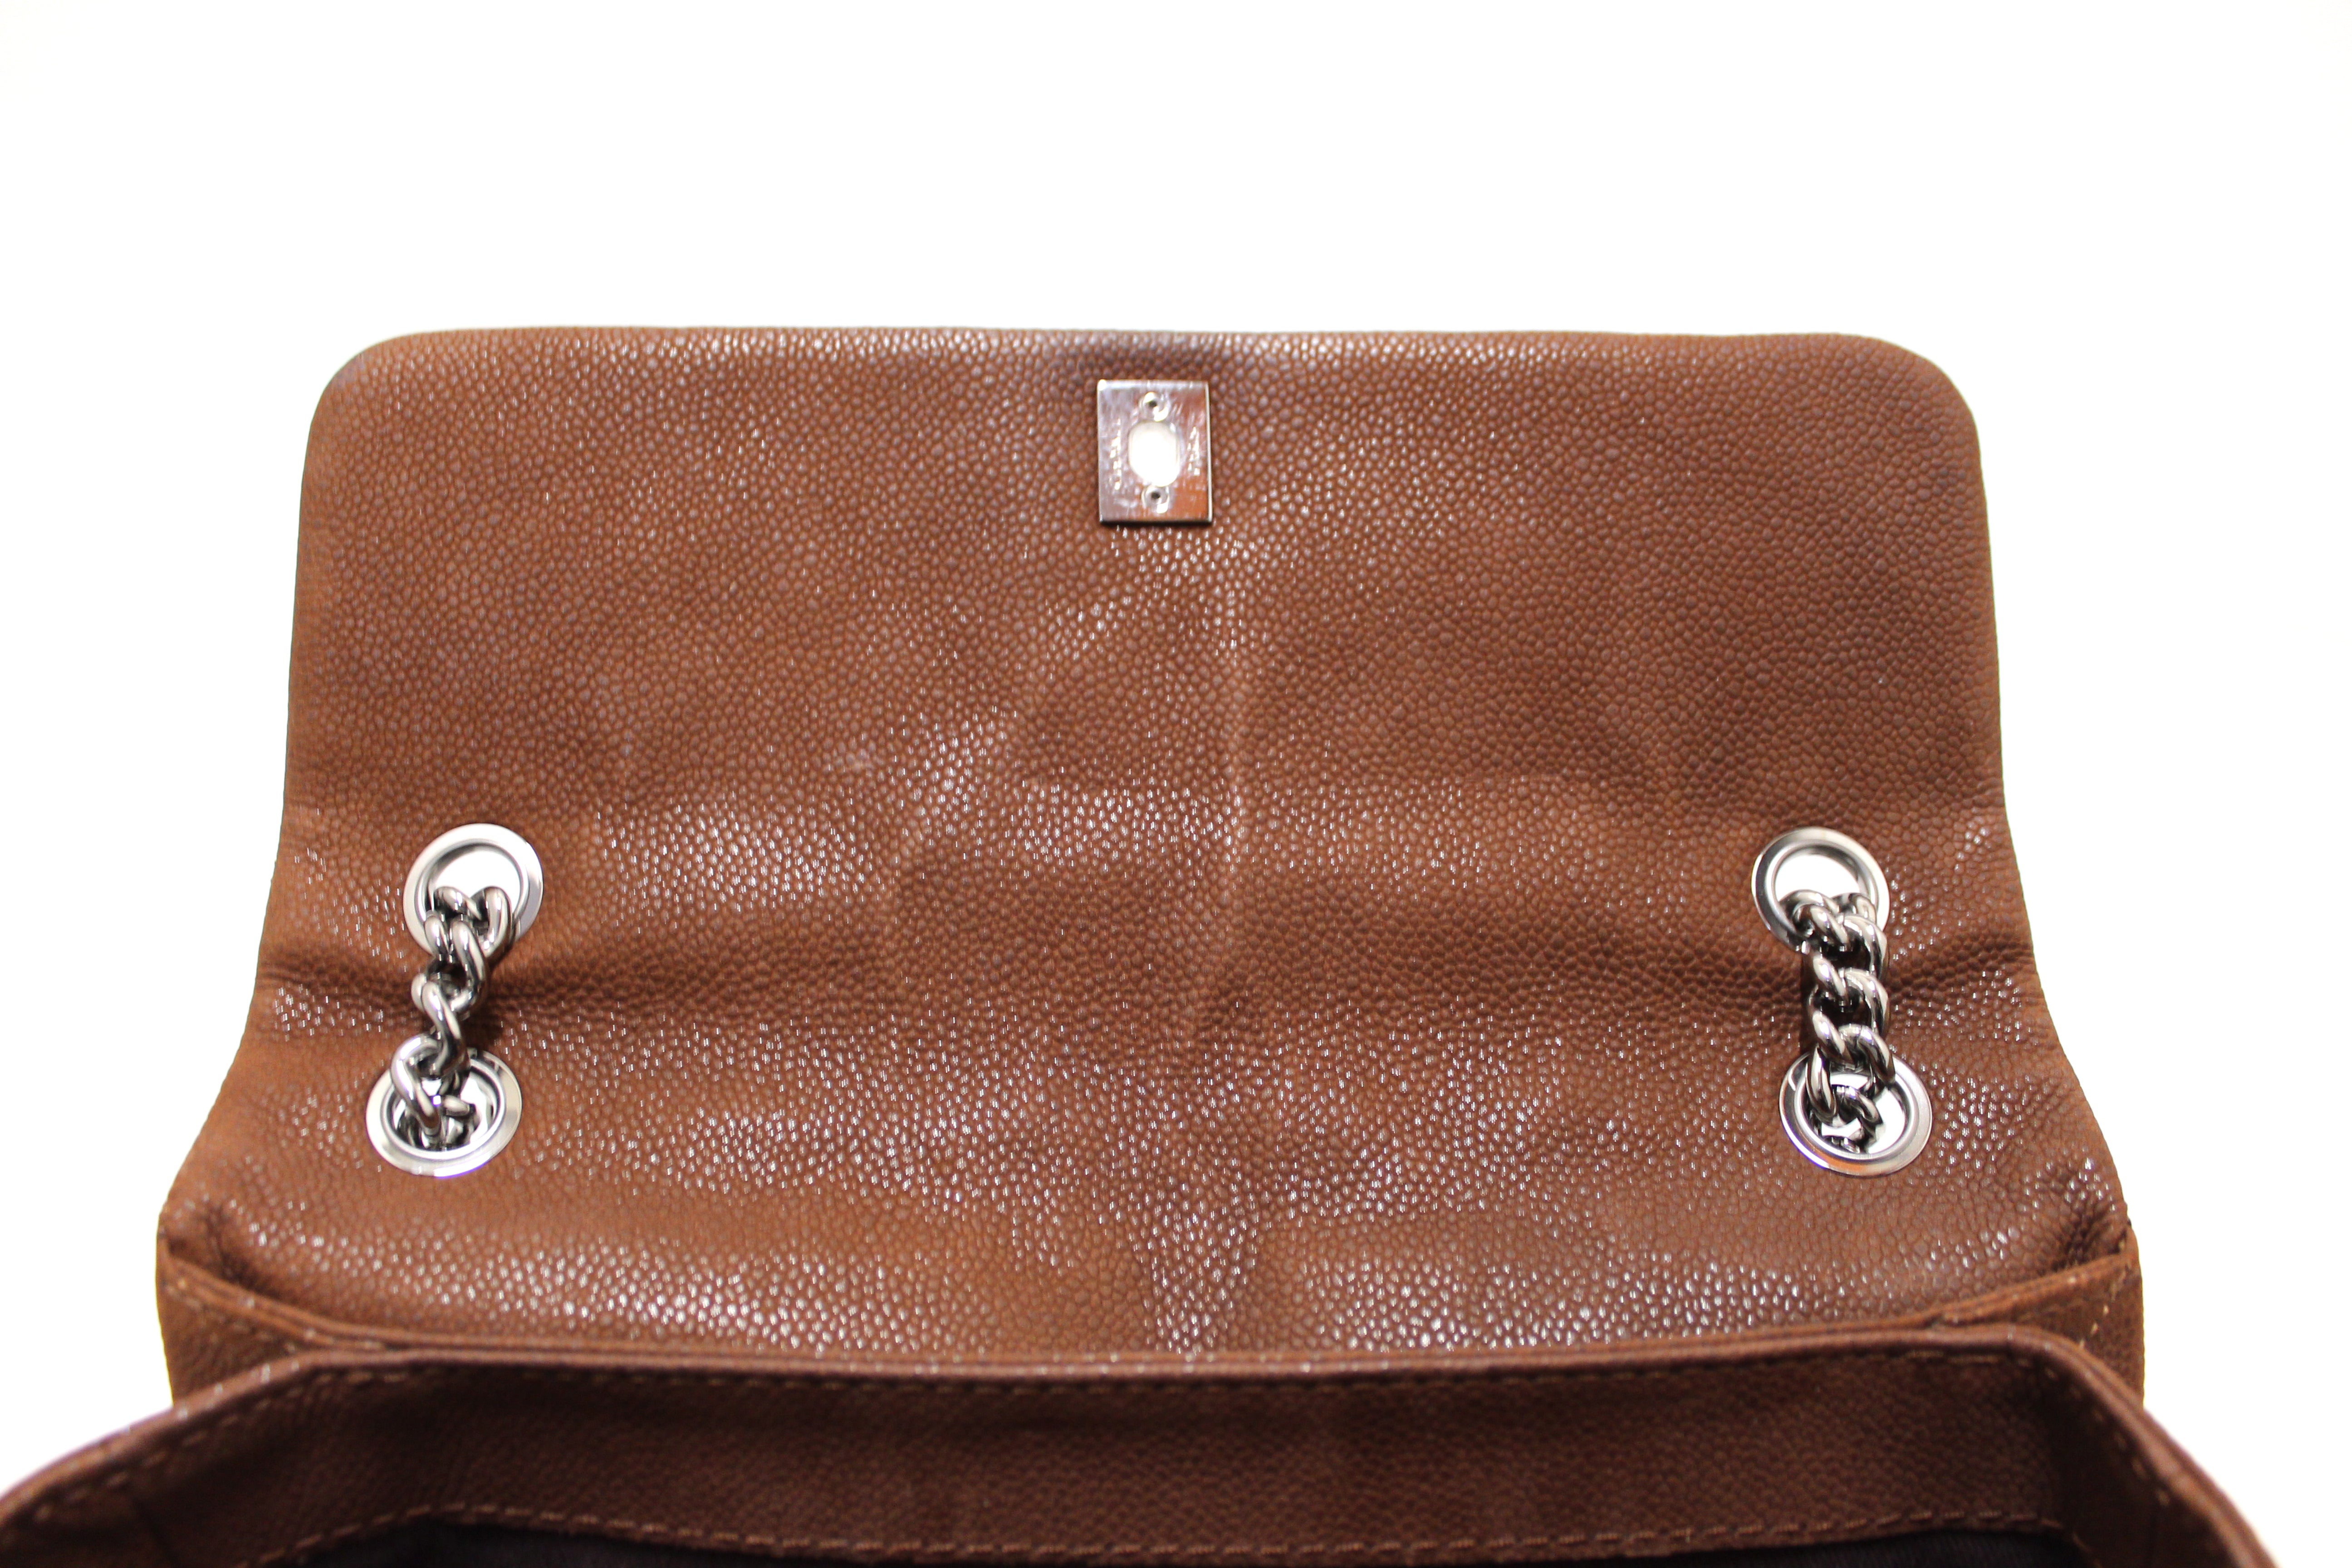 A BROWN LAMBSKIN LEATHER SINGLE FLAP BAG WITH GOLD HARDWARE